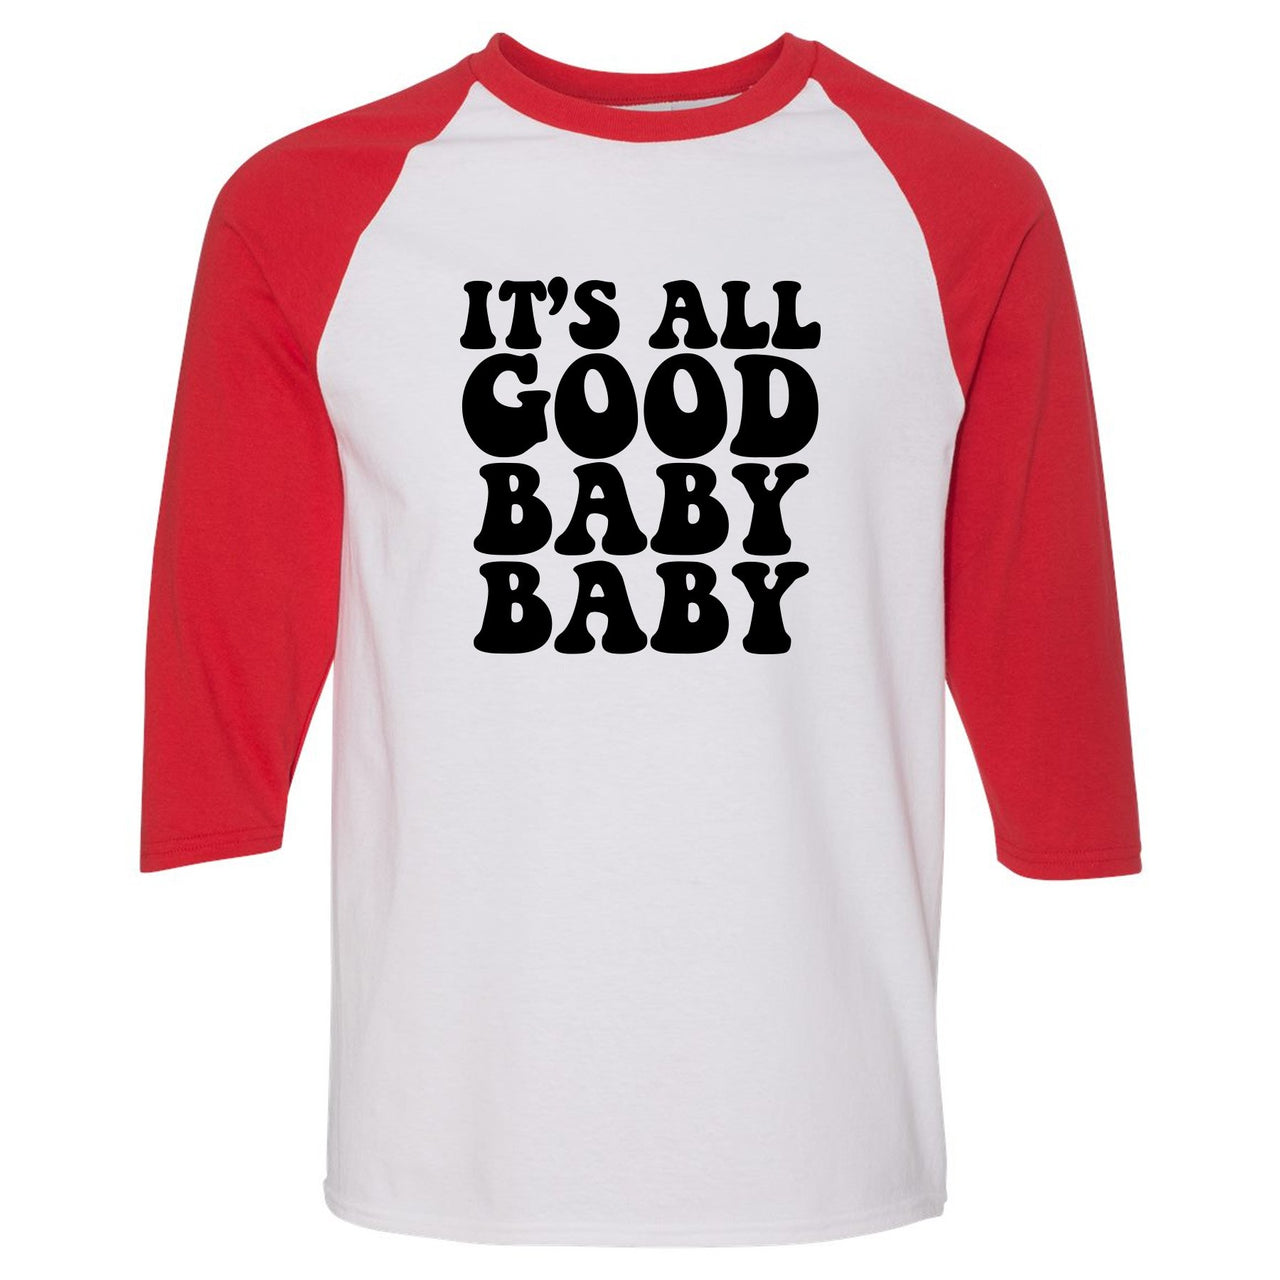 Reflections of a Champion 8s Raglan T Shirt | It's All Good Baby Baby, White and Red